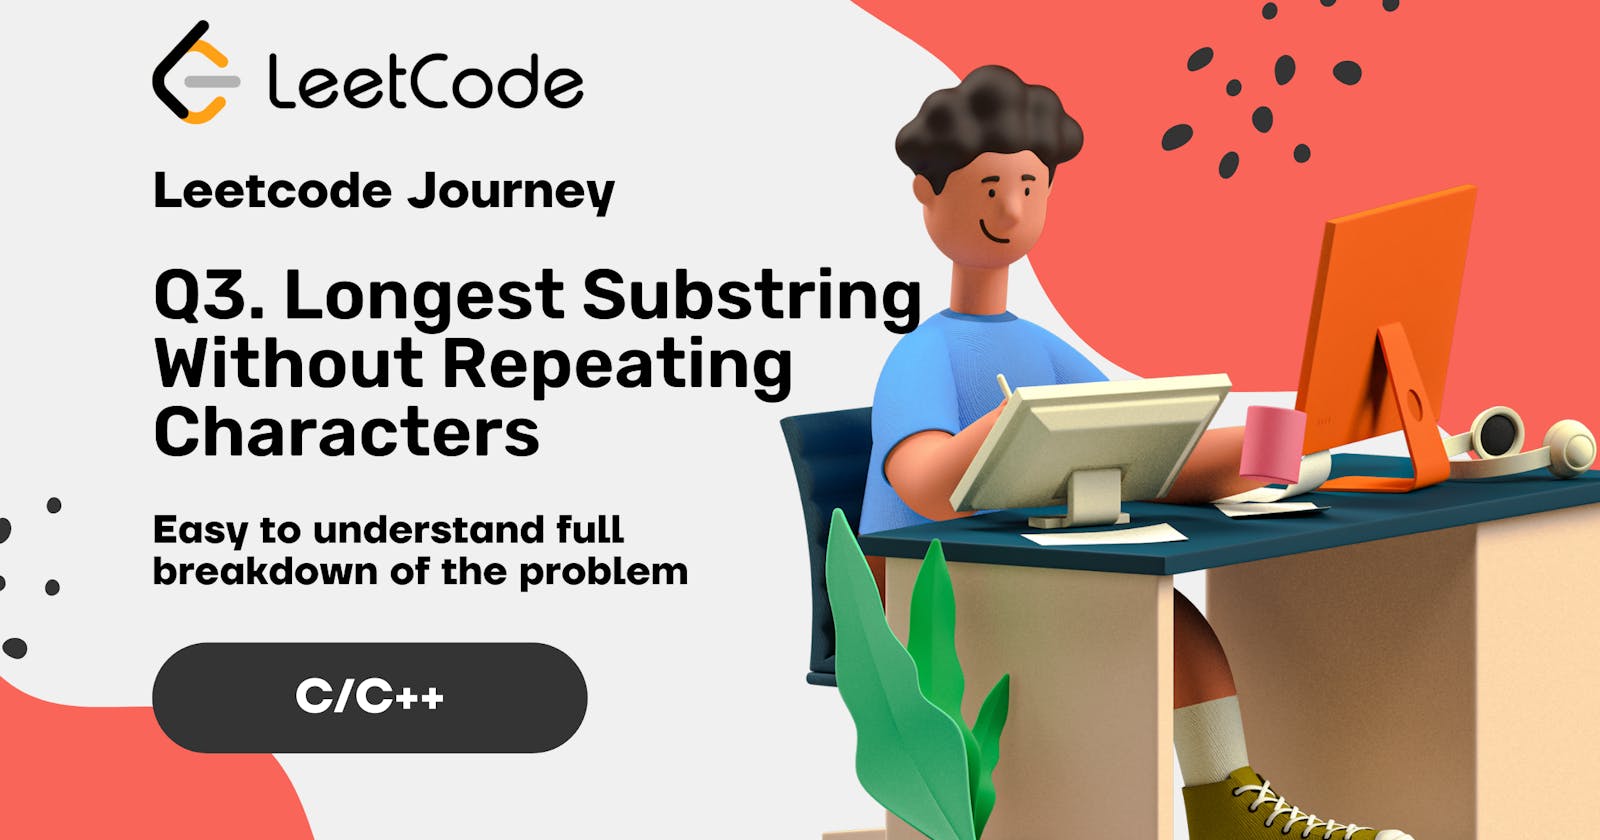 Leetcode journey - Question 3 - Longest Substring Without Repeating Characters